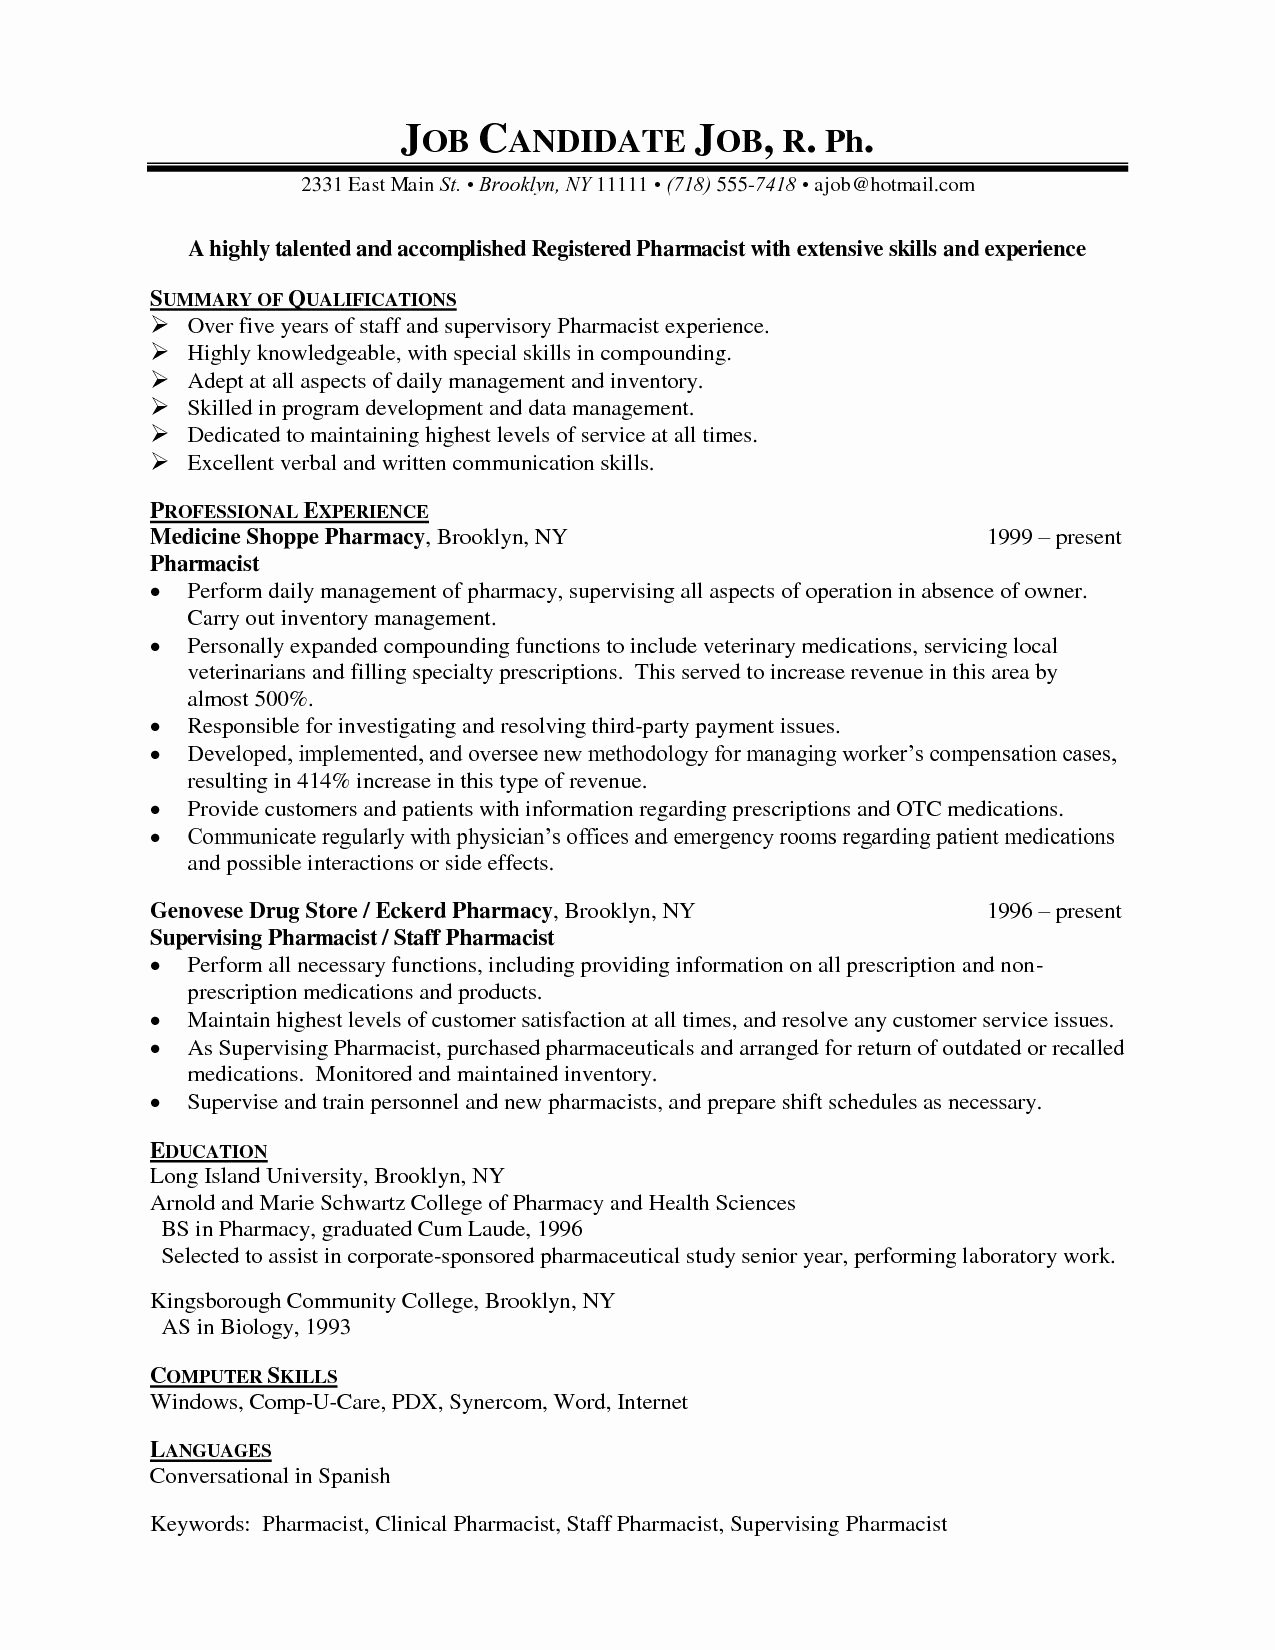 Pharmacist Resume Templates Beautiful Pin by topresumes On Latest Resume